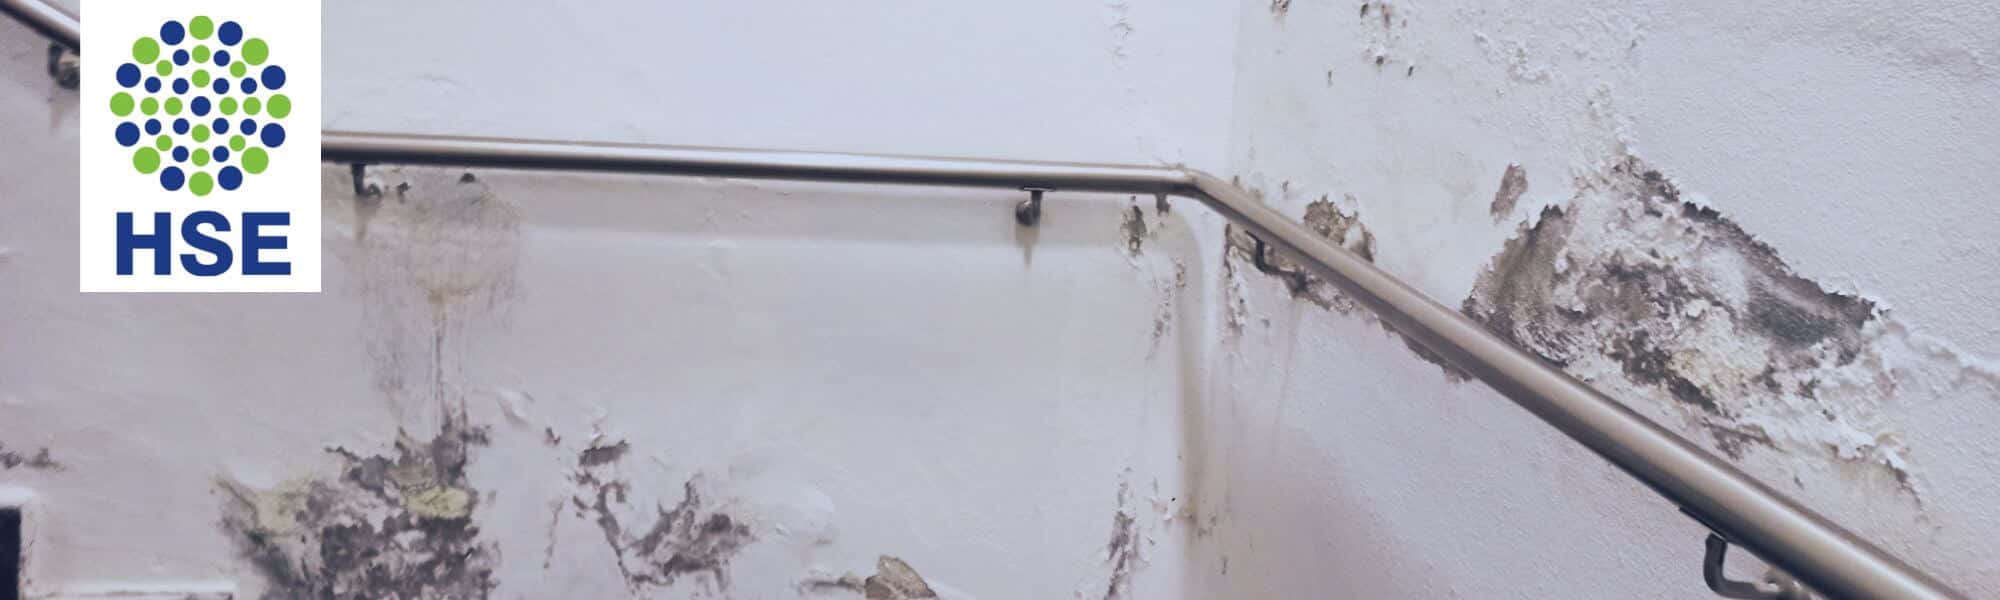 HSE Australia Managing Mould in the Workplace The Overlooked Risk of Workers' Safety Content1